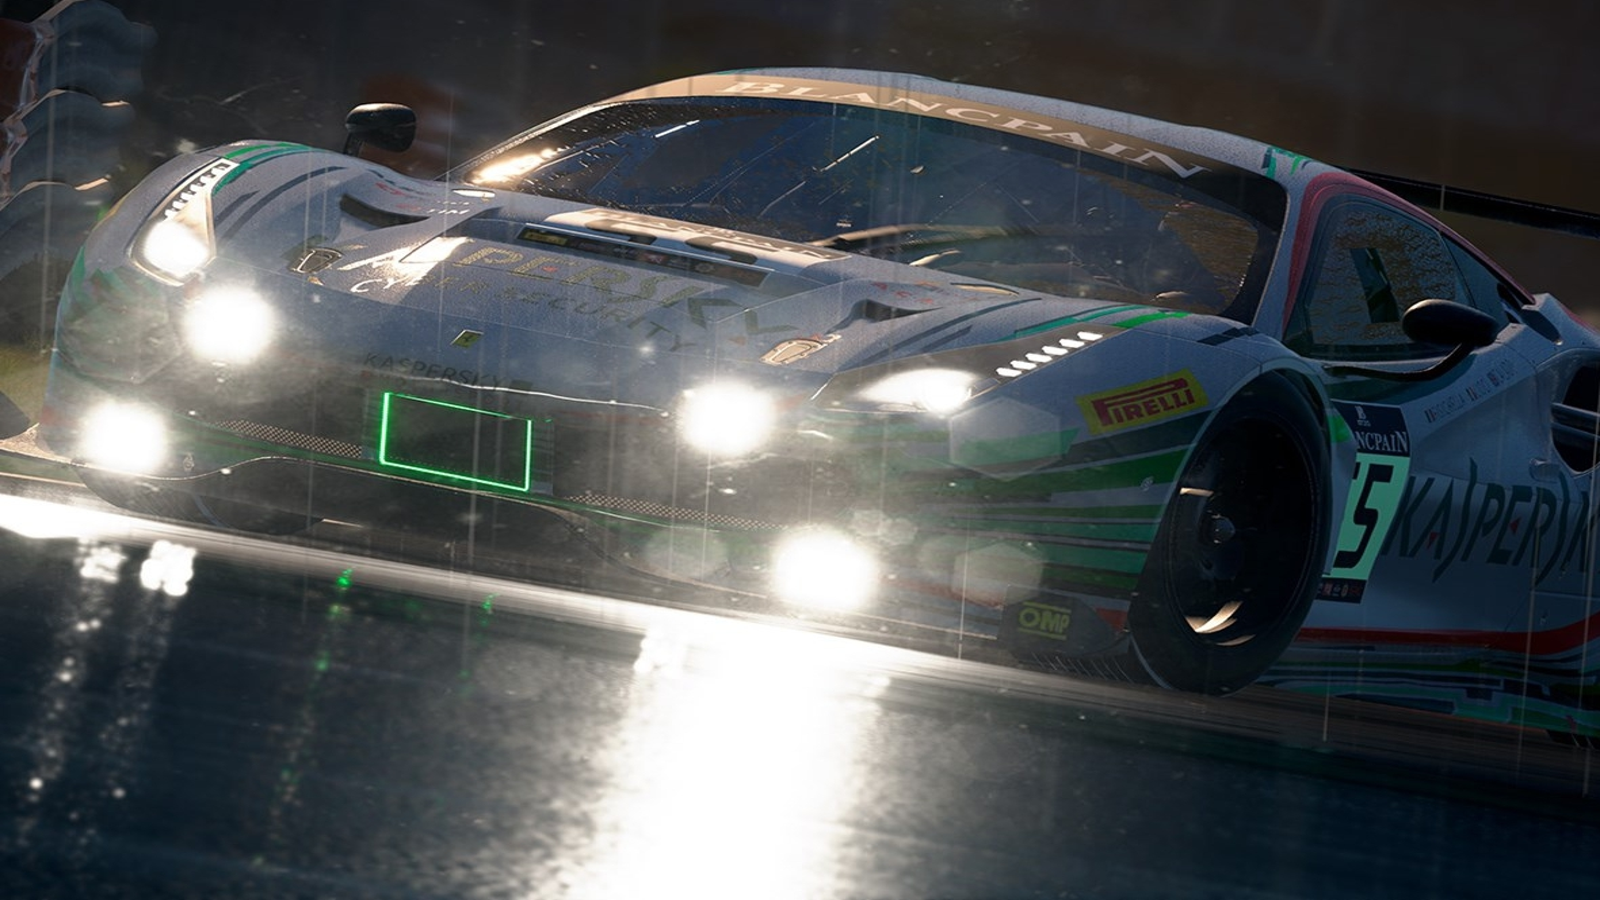 Assetto Corsa on PS4 and Xbox One interview